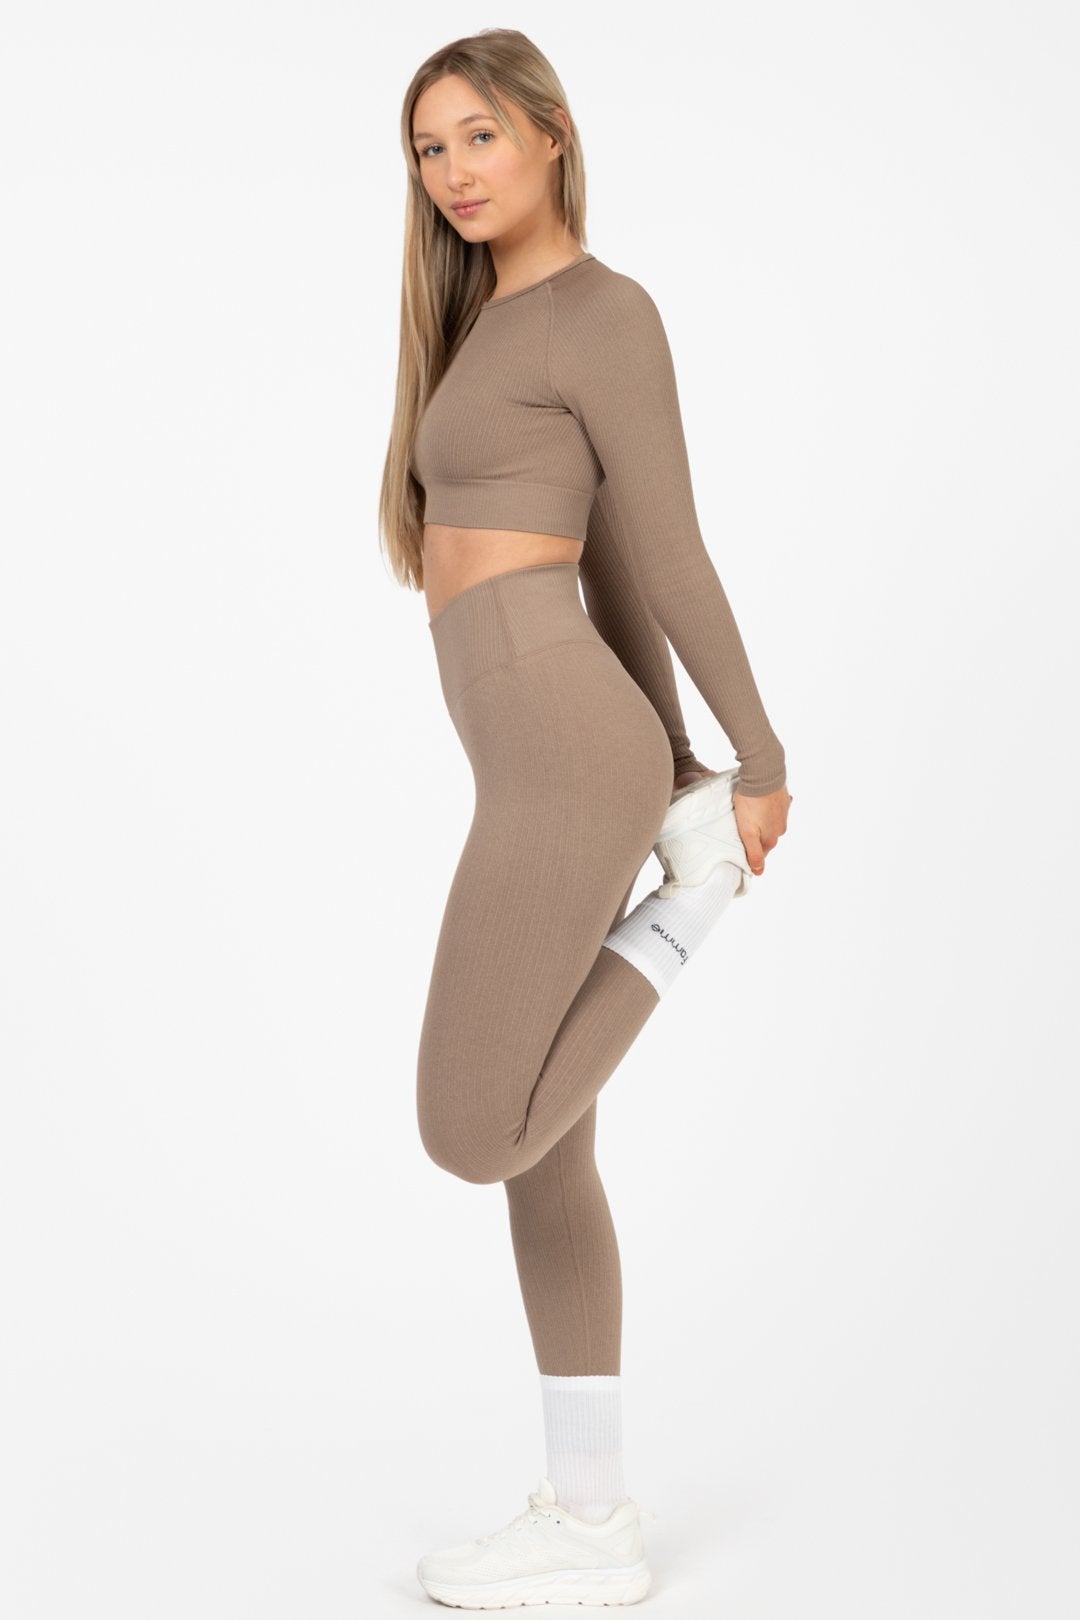 Beige Ribbed Seamless Tights - for dame - Famme - Leggings